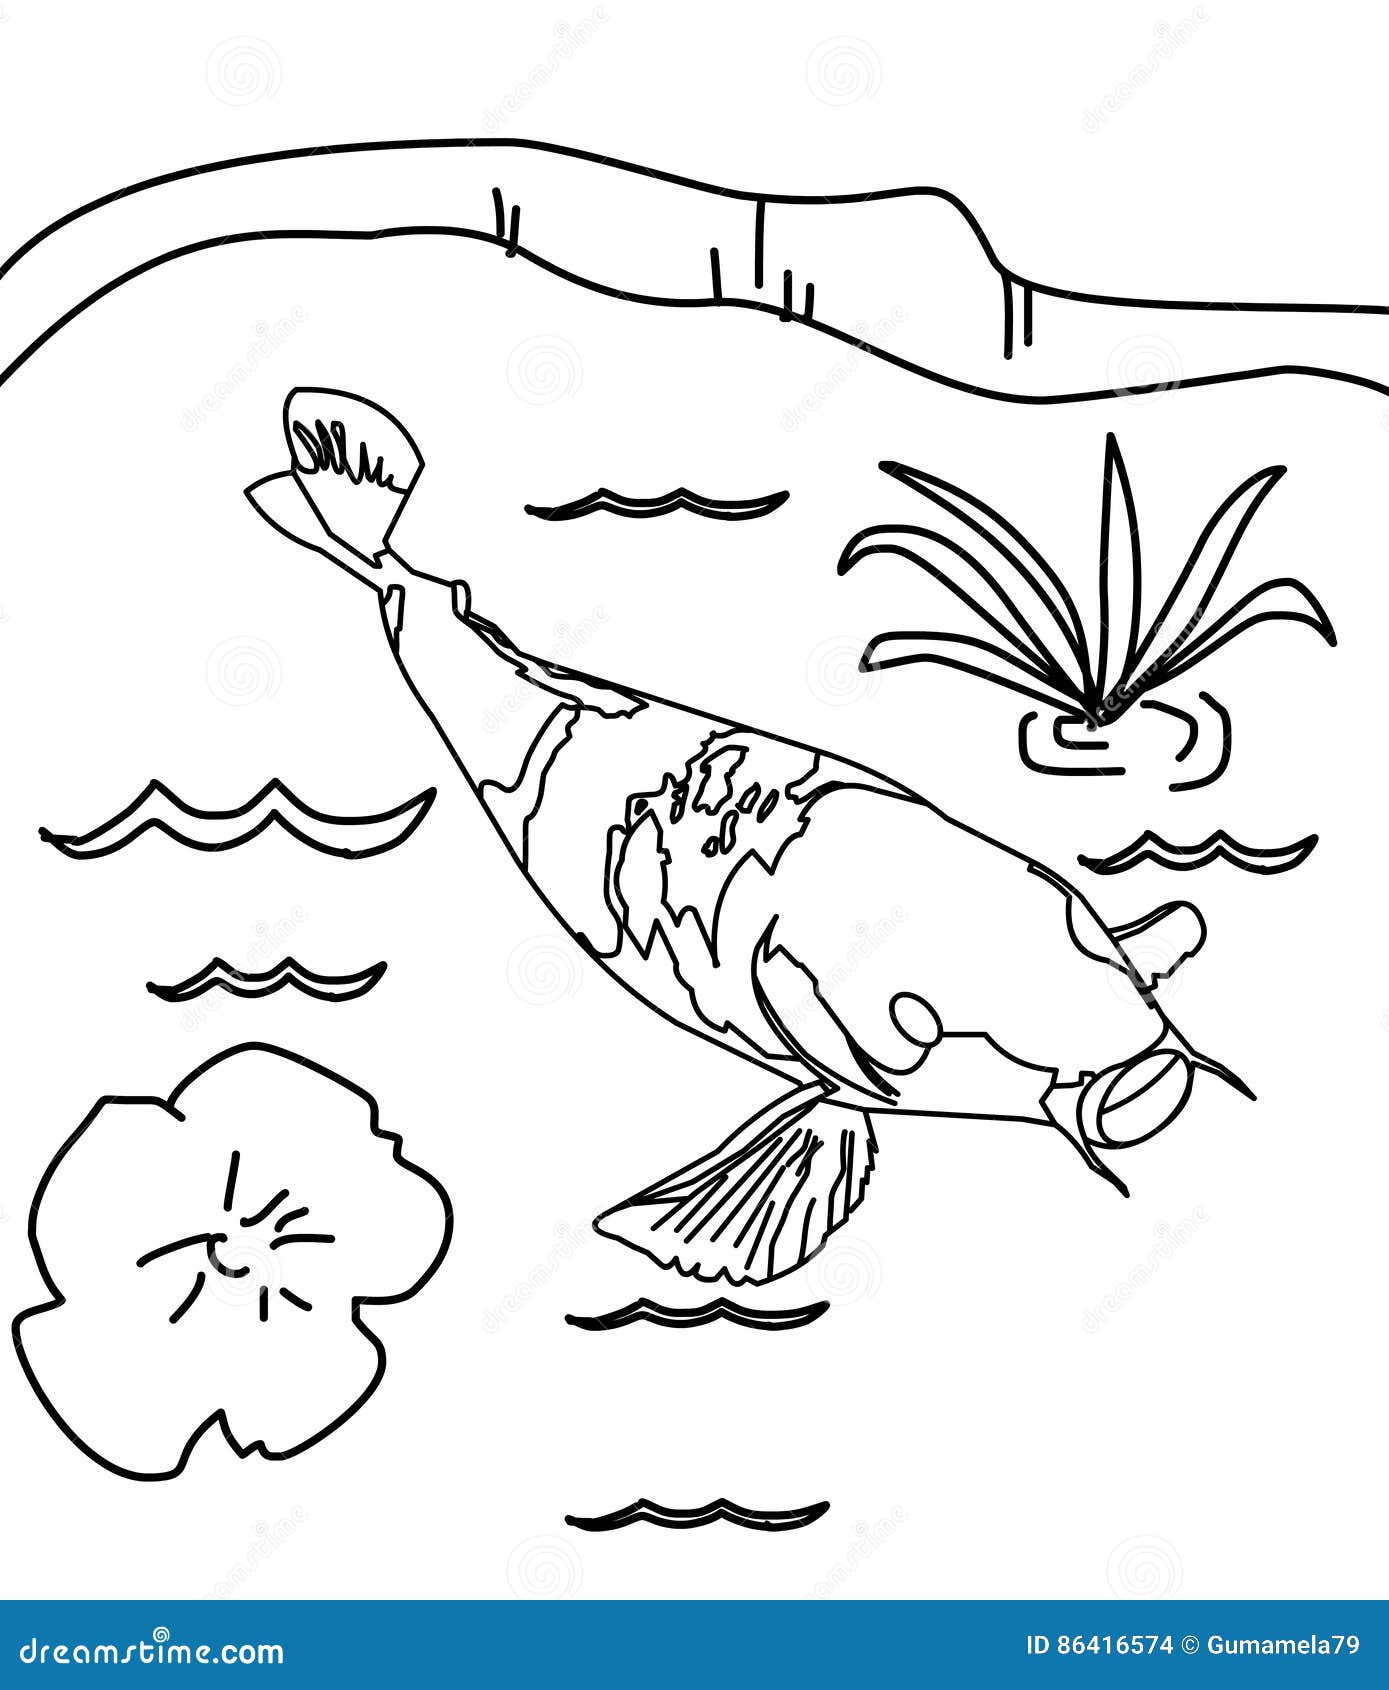 Fish coloring page stock illustration. Illustration of characters